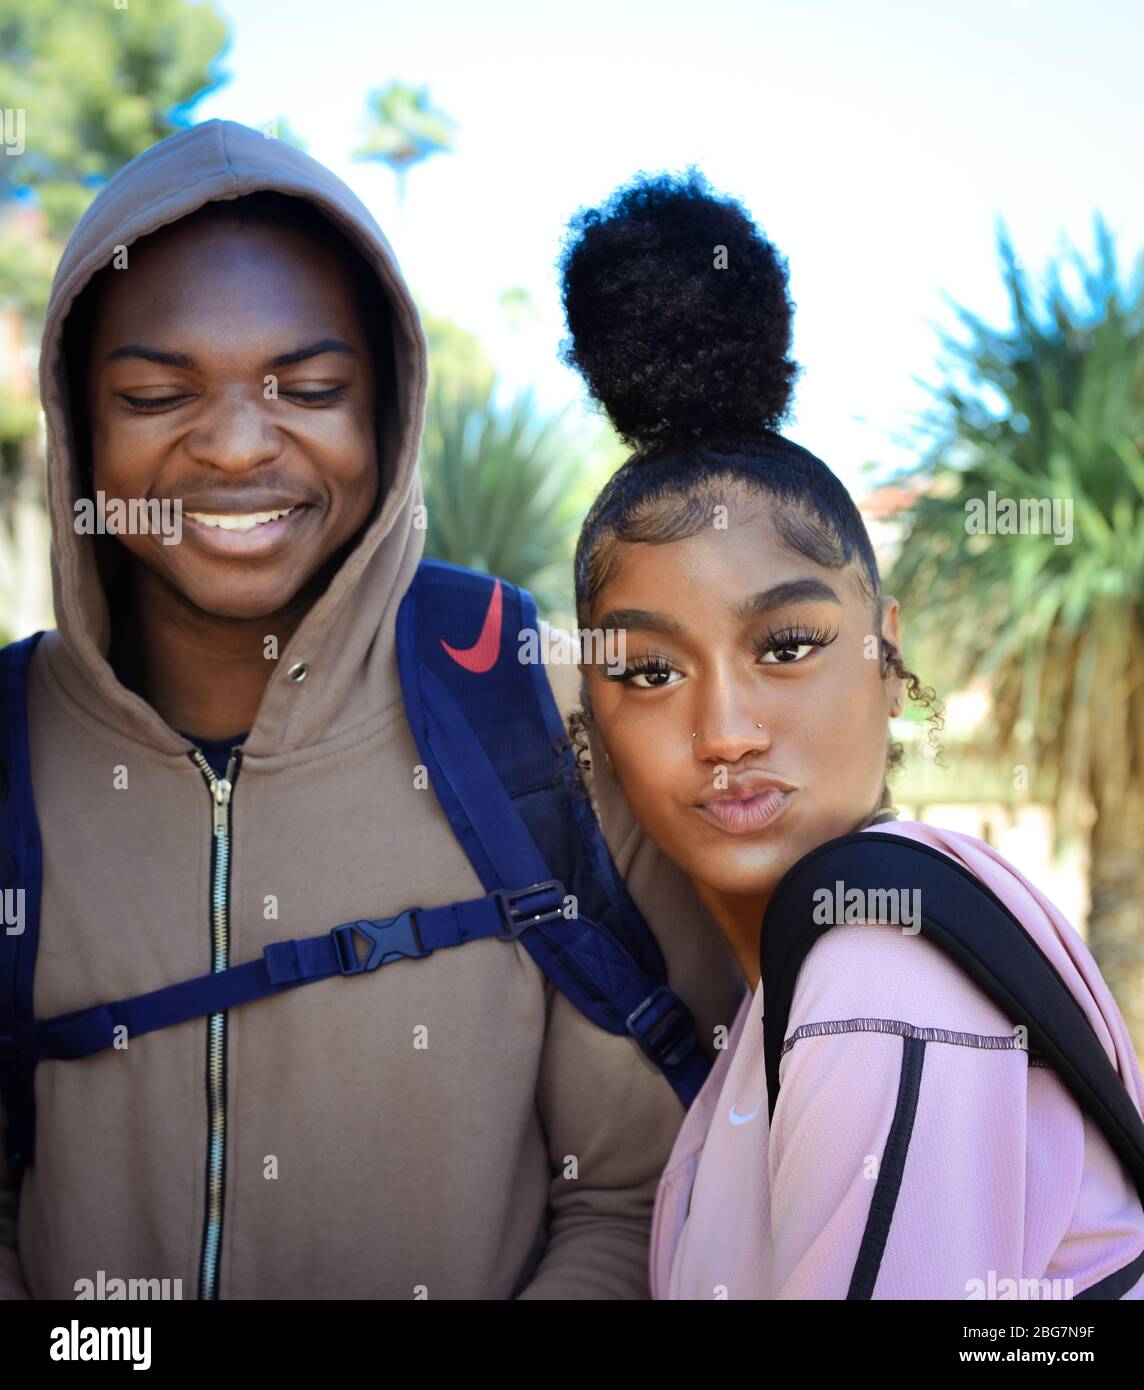 A smiling man and beautiful young woman of color, enjoy campus life with  her sassy attitude and puckered lips with trendy up-do hairstyle, Tucson, AZ Stock Photo